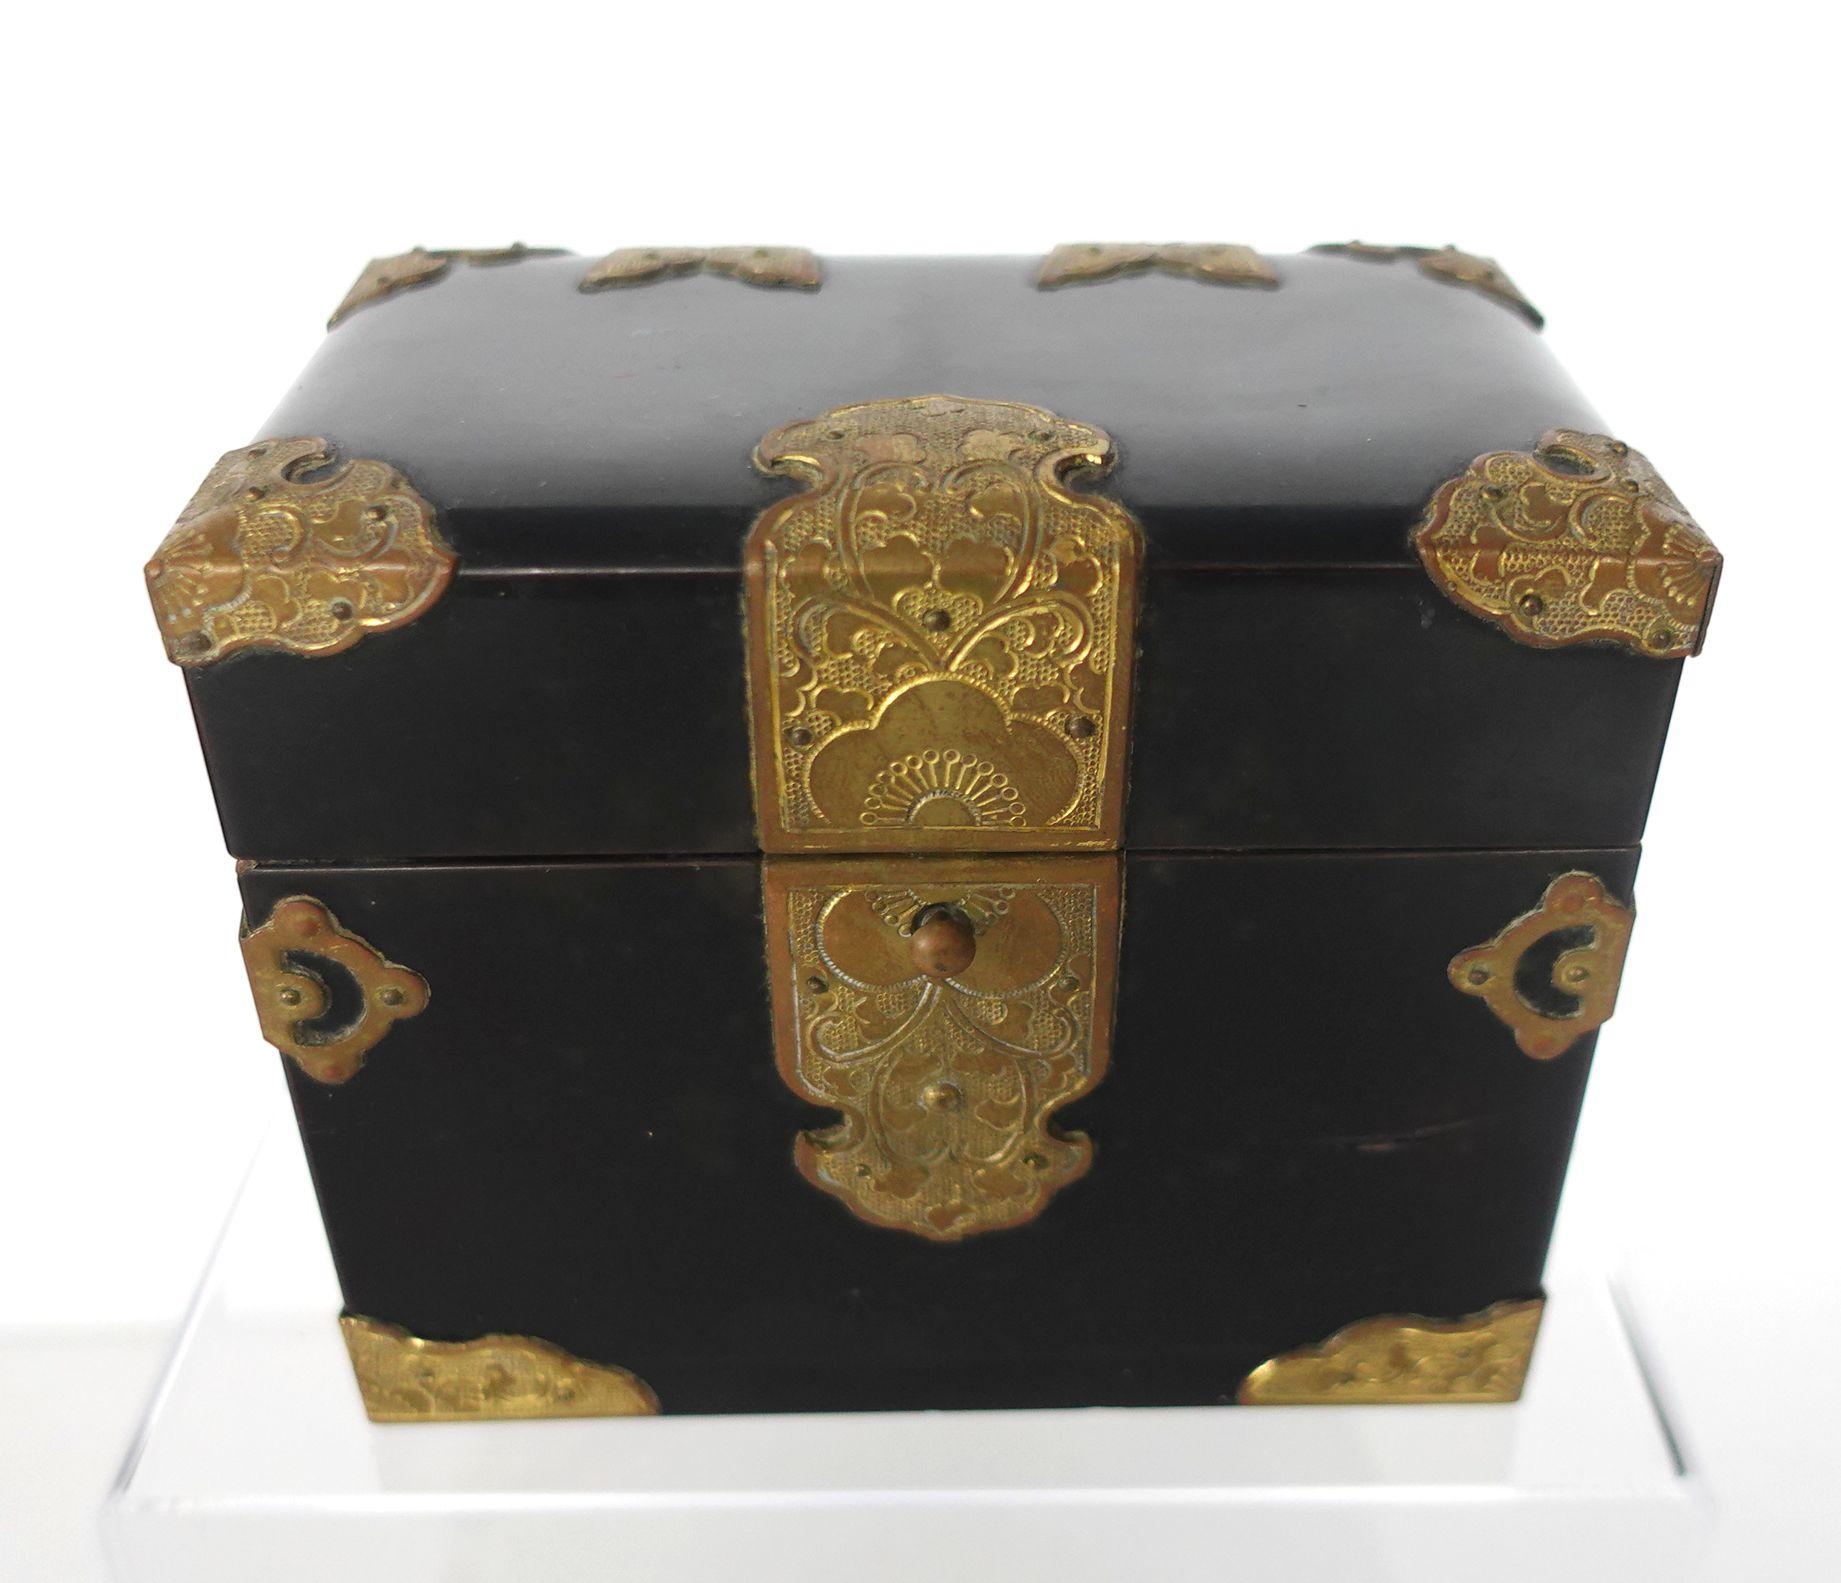 Black lacquer box with brass decorations opening to two compartments.